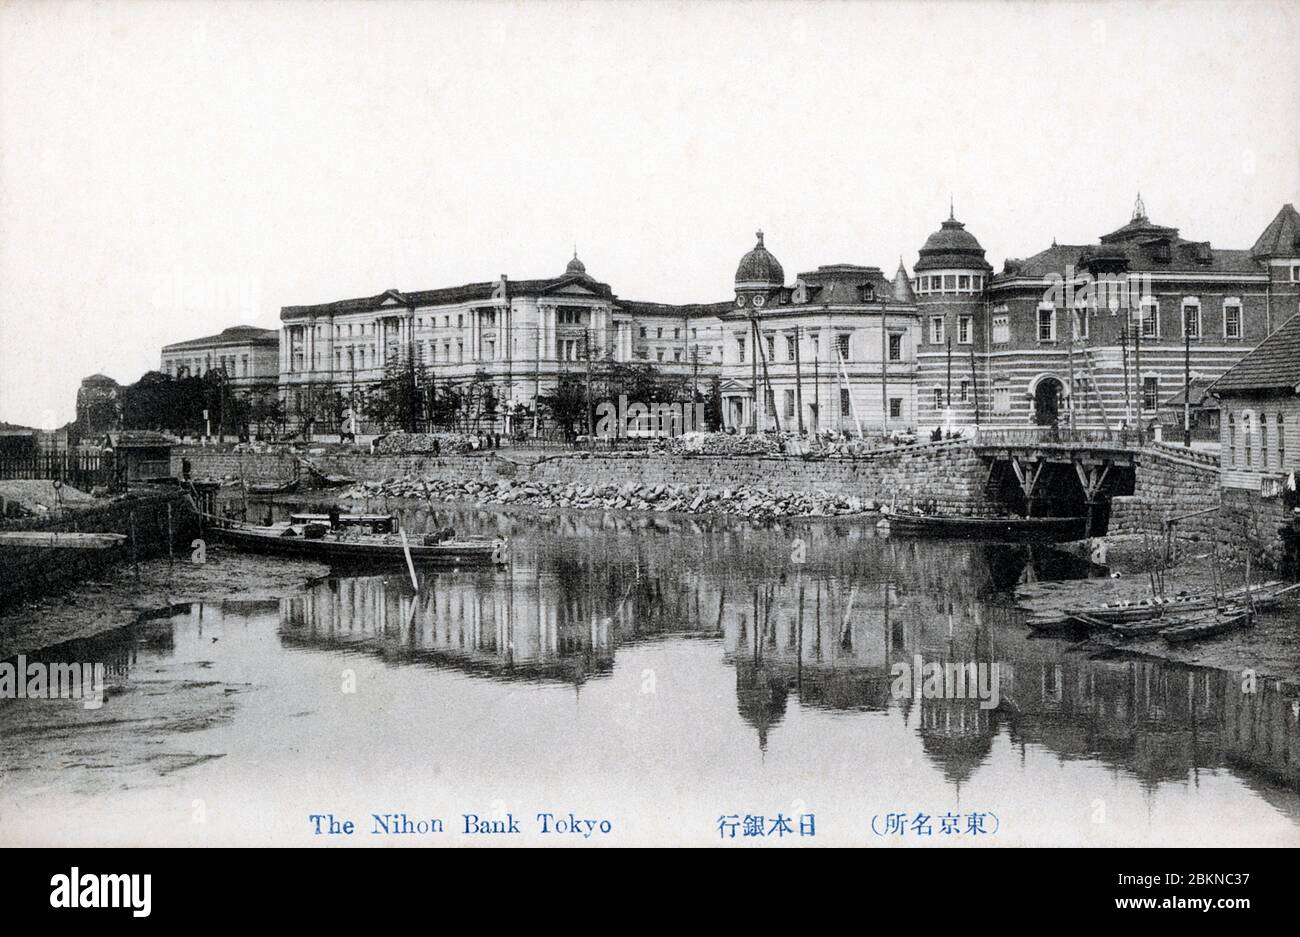 [ 1910s Japan - Bank of Japan, Tokyo ] —   Nihon Ginko (Bank of Japan) in Tokyo. The building was designed by Kingo Tatsuno (辰野金吾, 1854–1919) and completed in 1896 (Meiji 29).  20th century vintage postcard. Stock Photo